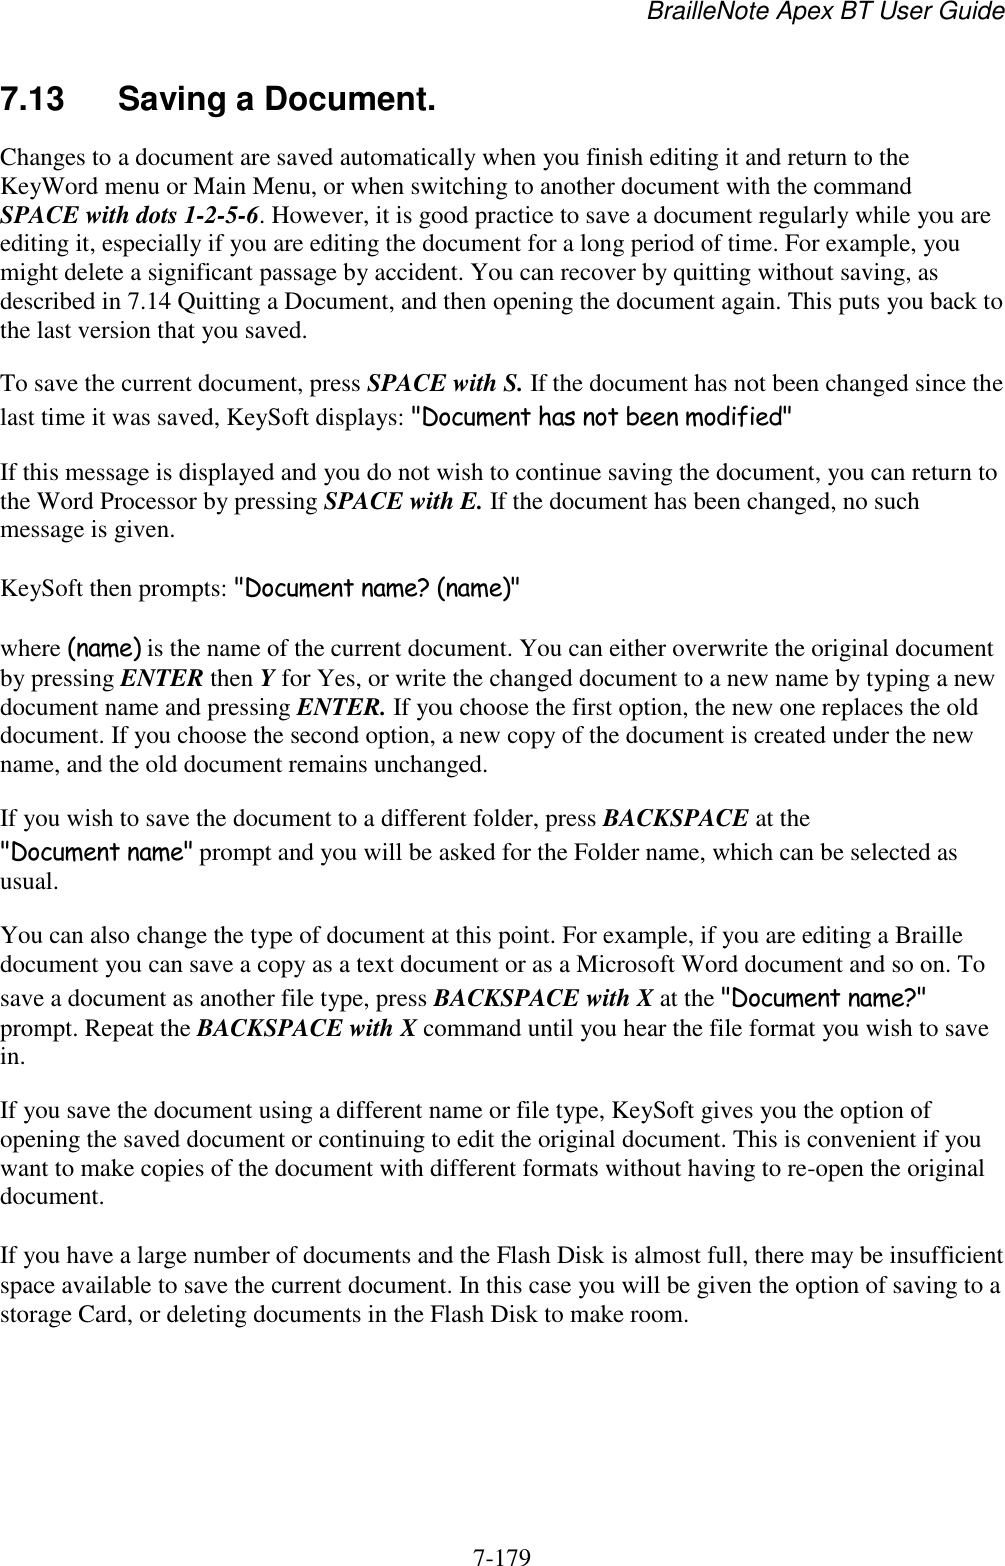 BrailleNote Apex BT User Guide   7-179   7.13  Saving a Document. Changes to a document are saved automatically when you finish editing it and return to the KeyWord menu or Main Menu, or when switching to another document with the command SPACE with dots 1-2-5-6. However, it is good practice to save a document regularly while you are editing it, especially if you are editing the document for a long period of time. For example, you might delete a significant passage by accident. You can recover by quitting without saving, as described in 7.14 Quitting a Document, and then opening the document again. This puts you back to the last version that you saved. To save the current document, press SPACE with S. If the document has not been changed since the last time it was saved, KeySoft displays: &quot;Document has not been modified&quot; If this message is displayed and you do not wish to continue saving the document, you can return to the Word Processor by pressing SPACE with E. If the document has been changed, no such message is given. KeySoft then prompts: &quot;Document name? (name)&quot; where (name) is the name of the current document. You can either overwrite the original document by pressing ENTER then Y for Yes, or write the changed document to a new name by typing a new document name and pressing ENTER. If you choose the first option, the new one replaces the old document. If you choose the second option, a new copy of the document is created under the new name, and the old document remains unchanged. If you wish to save the document to a different folder, press BACKSPACE at the &quot;Document name&quot; prompt and you will be asked for the Folder name, which can be selected as usual. You can also change the type of document at this point. For example, if you are editing a Braille document you can save a copy as a text document or as a Microsoft Word document and so on. To save a document as another file type, press BACKSPACE with X at the &quot;Document name?&quot; prompt. Repeat the BACKSPACE with X command until you hear the file format you wish to save in. If you save the document using a different name or file type, KeySoft gives you the option of opening the saved document or continuing to edit the original document. This is convenient if you want to make copies of the document with different formats without having to re-open the original document. If you have a large number of documents and the Flash Disk is almost full, there may be insufficient space available to save the current document. In this case you will be given the option of saving to a storage Card, or deleting documents in the Flash Disk to make room.   